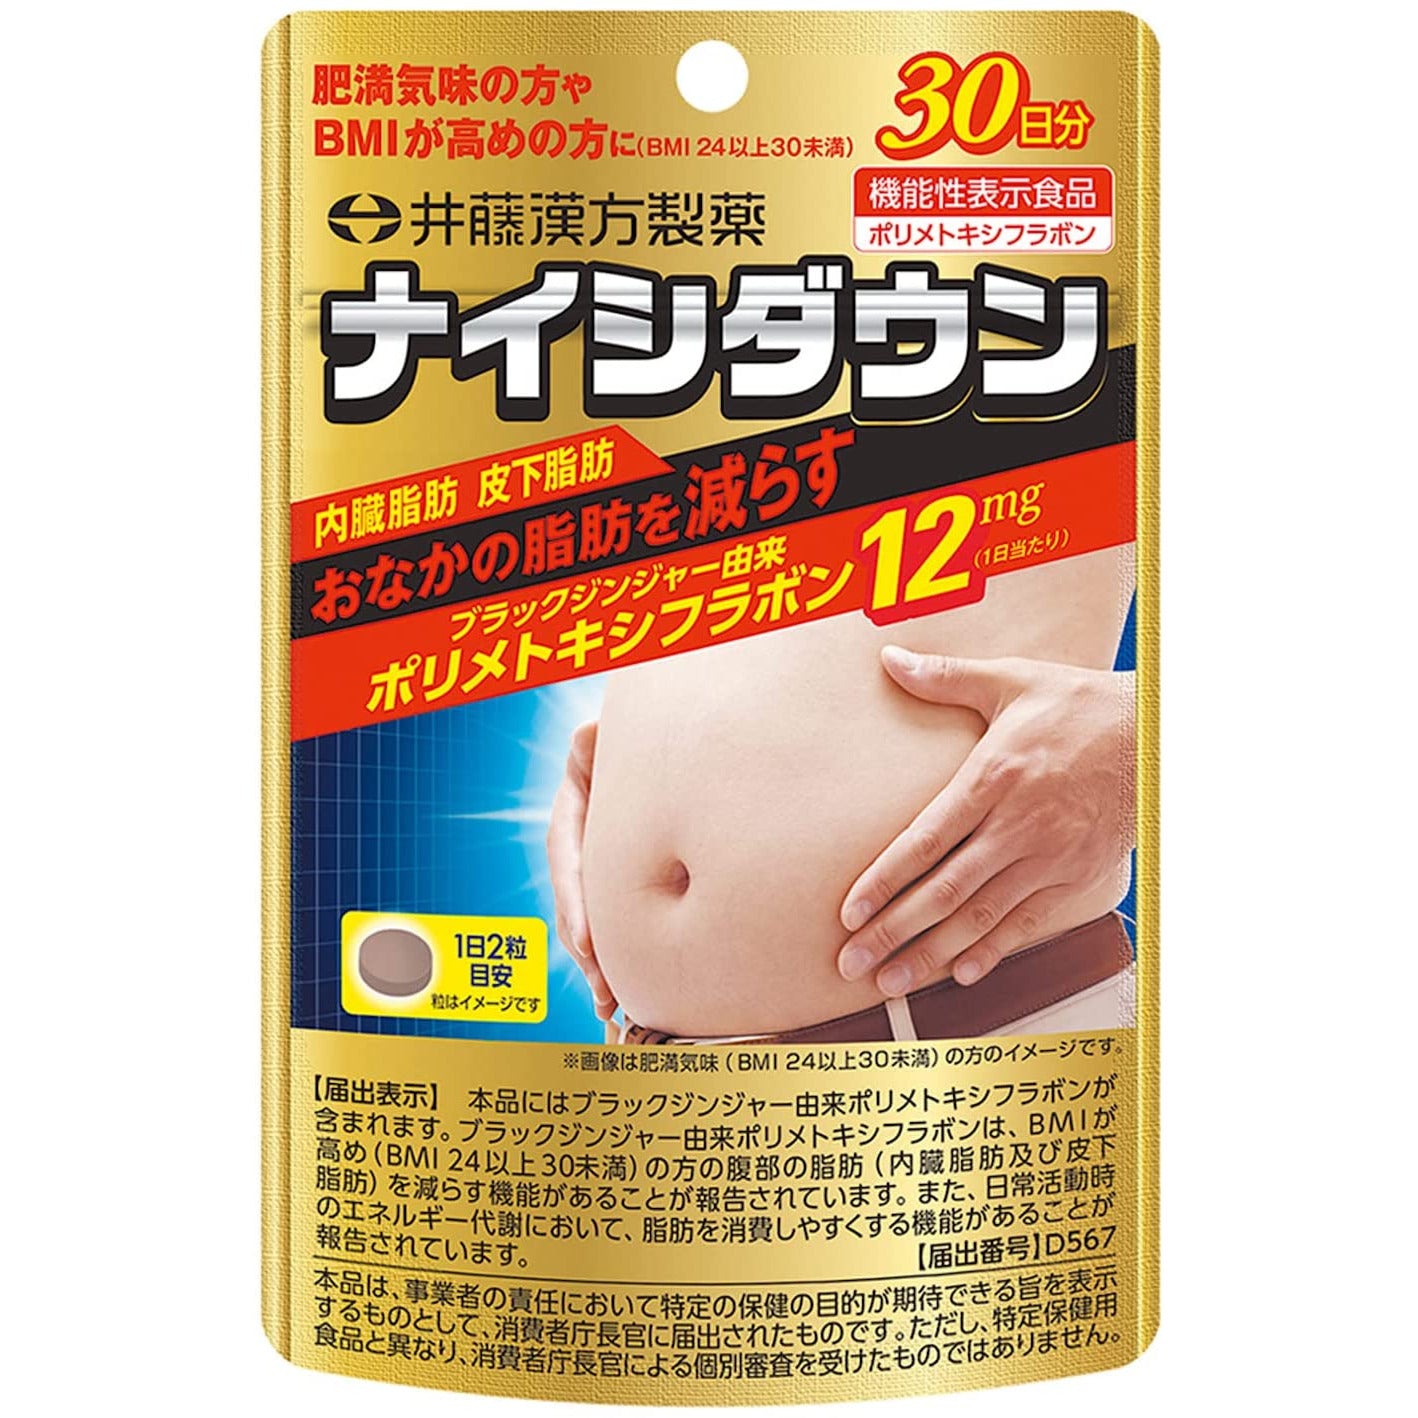 ITOH Naishi Down 60 tablets 30 days (visceral fat, subcutaneous fat) Diet support